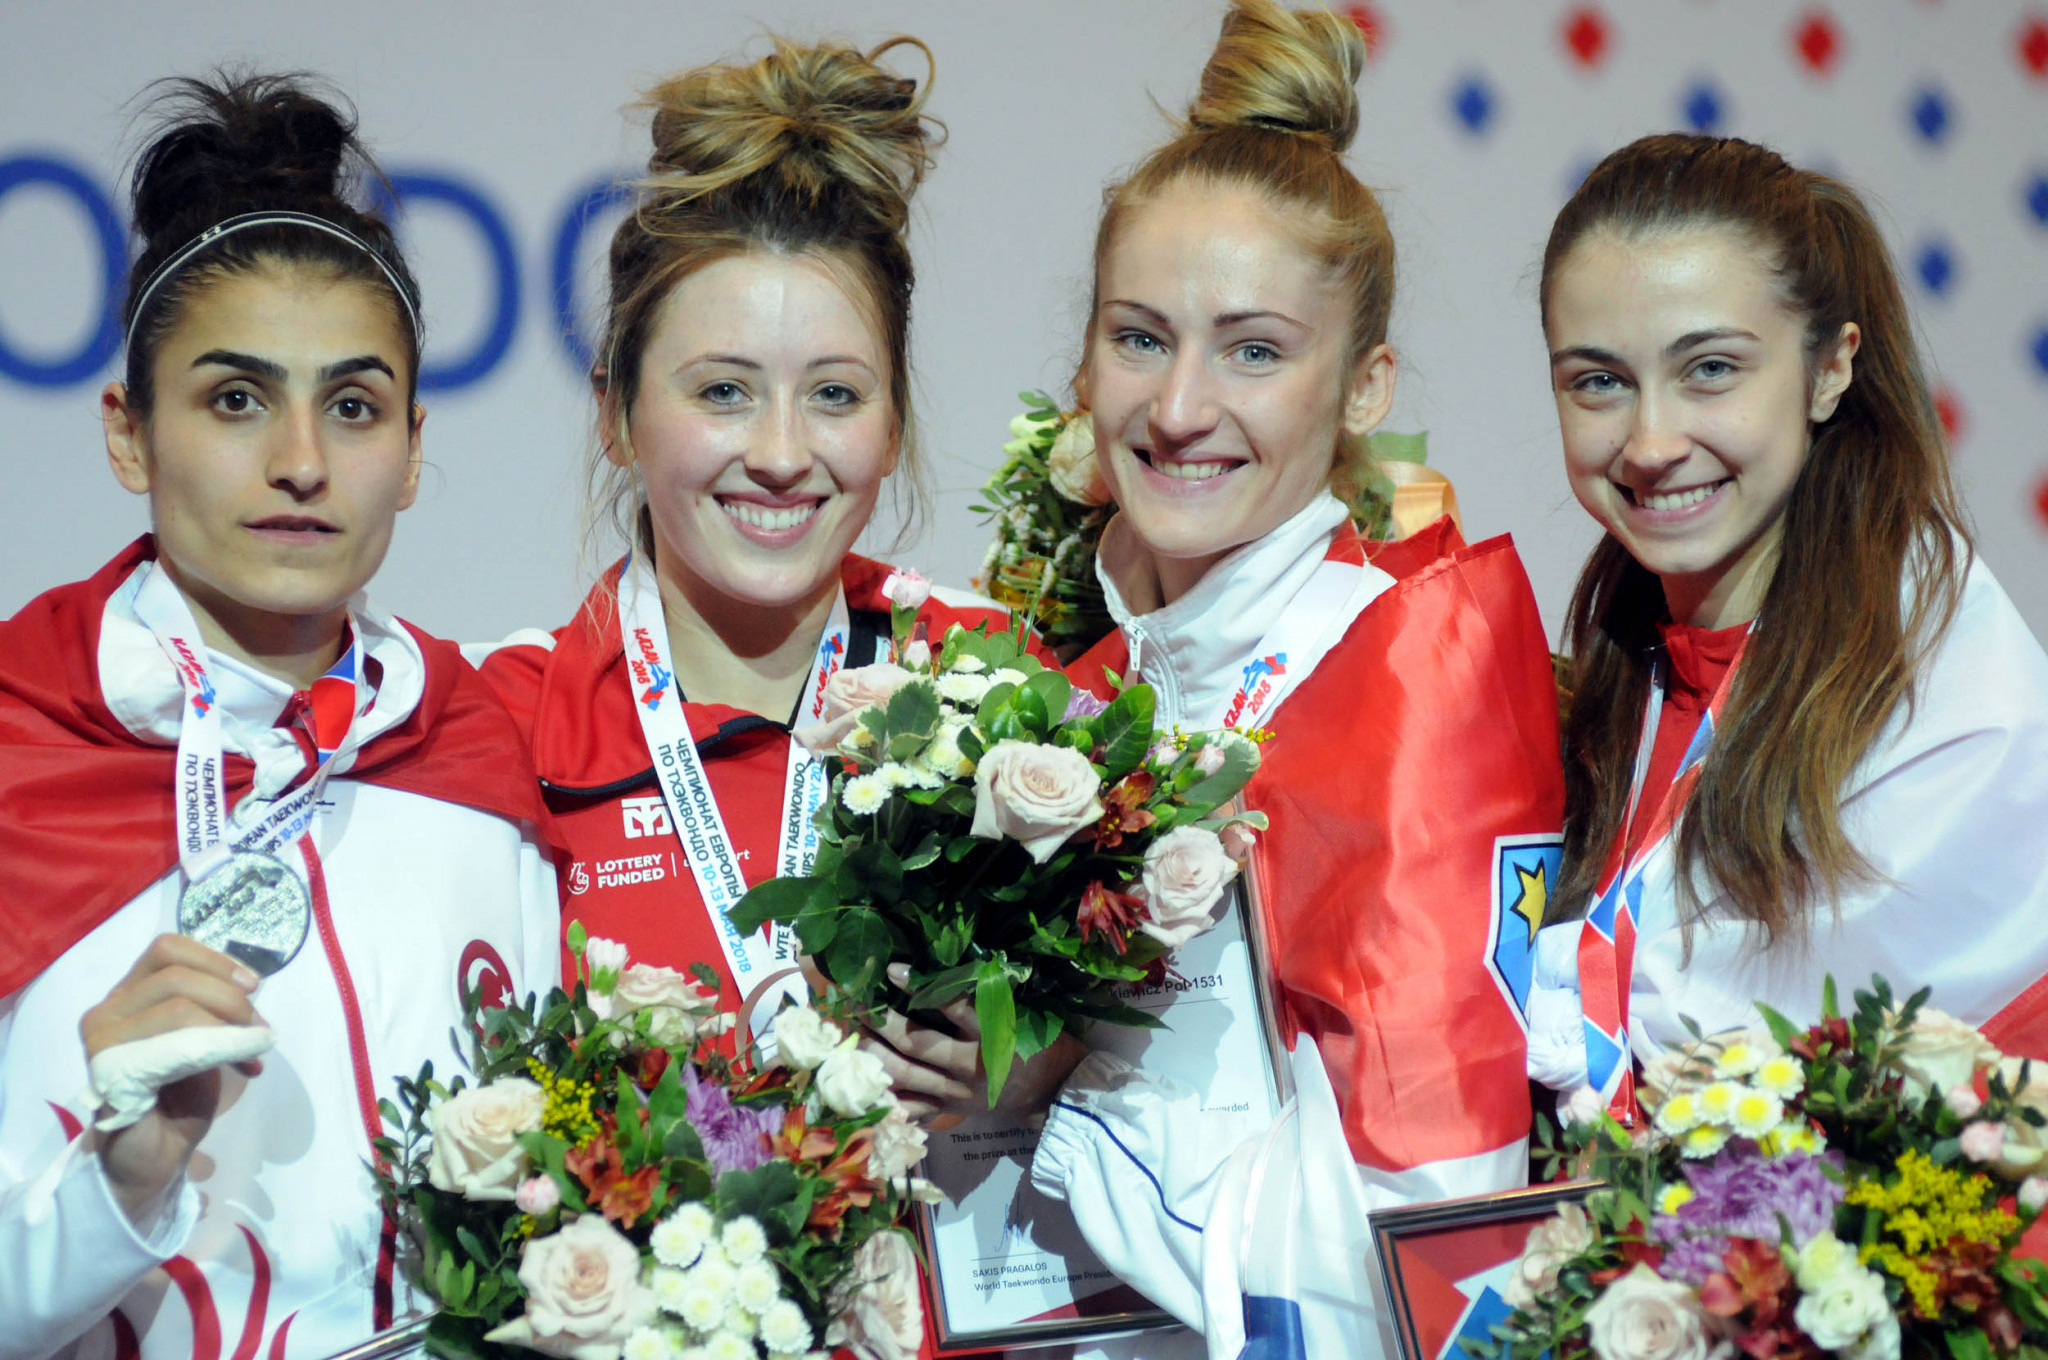 Jade Jones, second from left, has successfully defended her women’s under-57 kilograms title after coming out on top at the European Taekwondo Championships in Kazan ©World Taekwondo Europe/Murat Tarhan